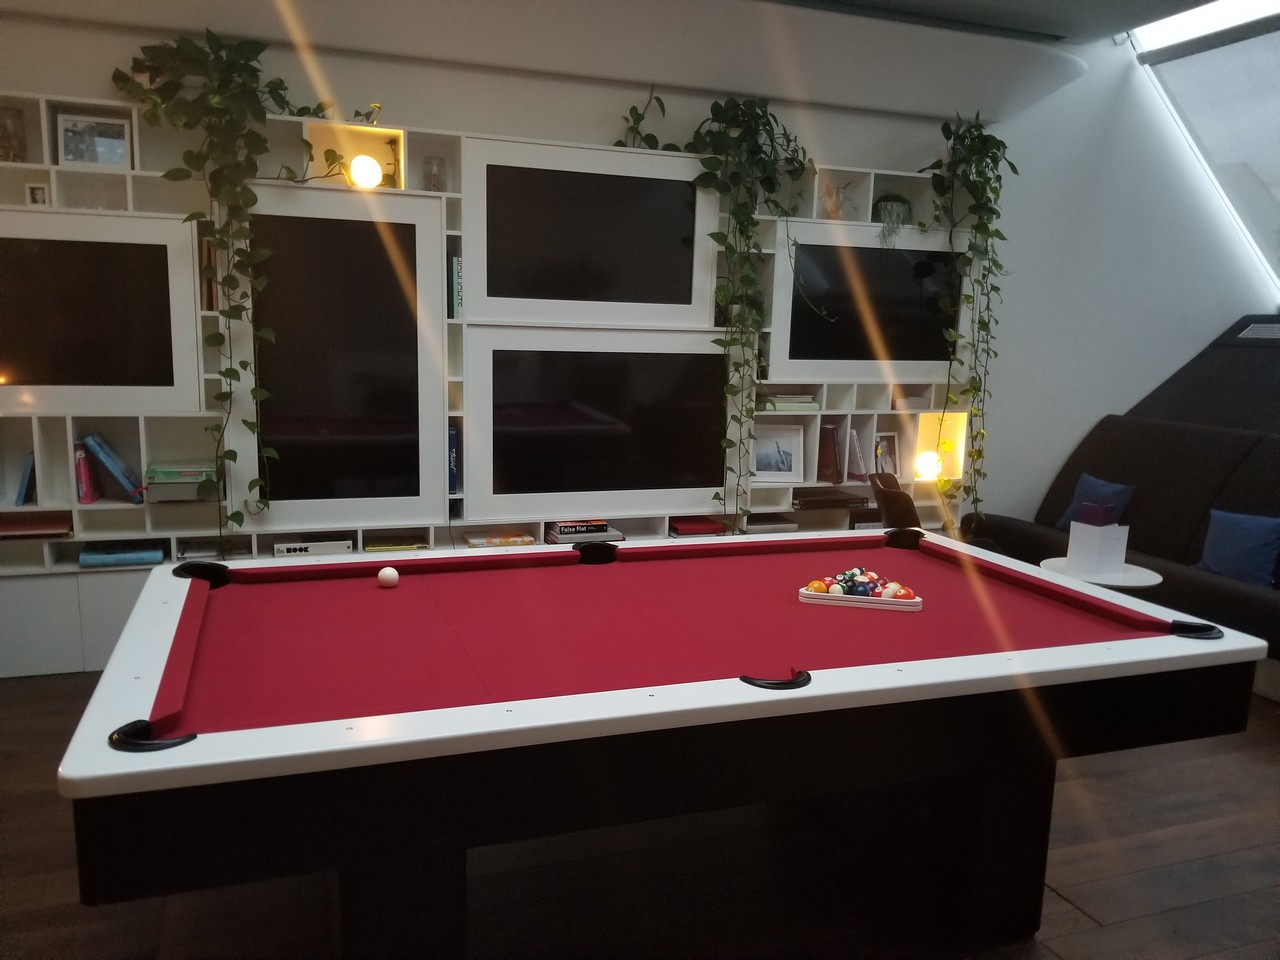 a pool table in a room with white tvs and plants